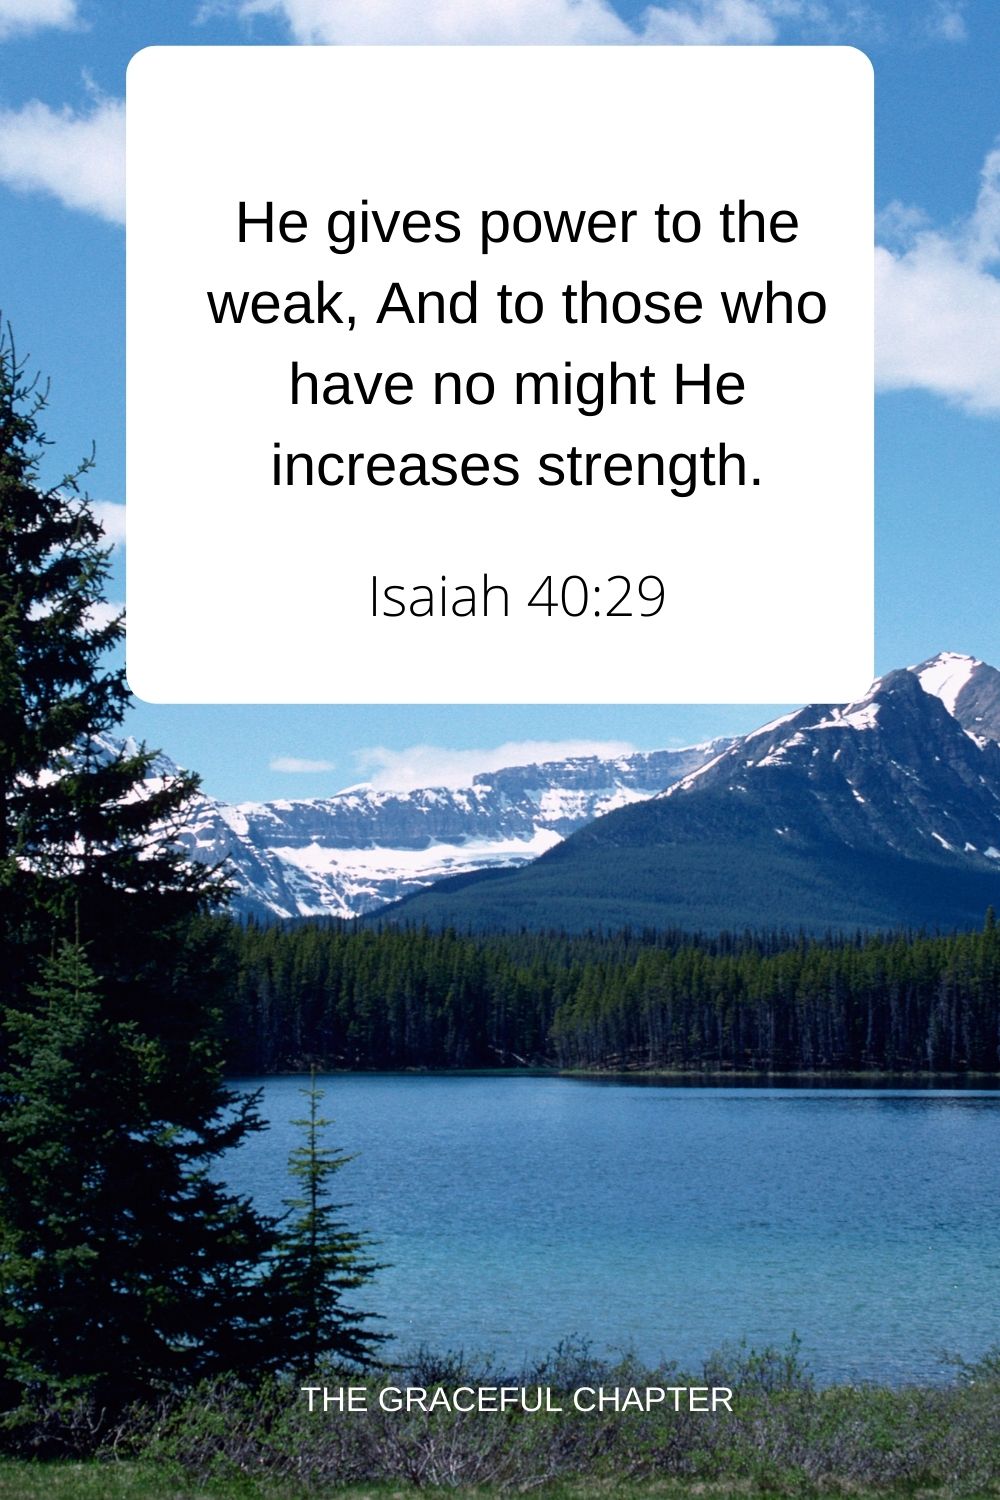 He gives power to the weak, And to those who have no might He increases strength. Isaiah 40:29